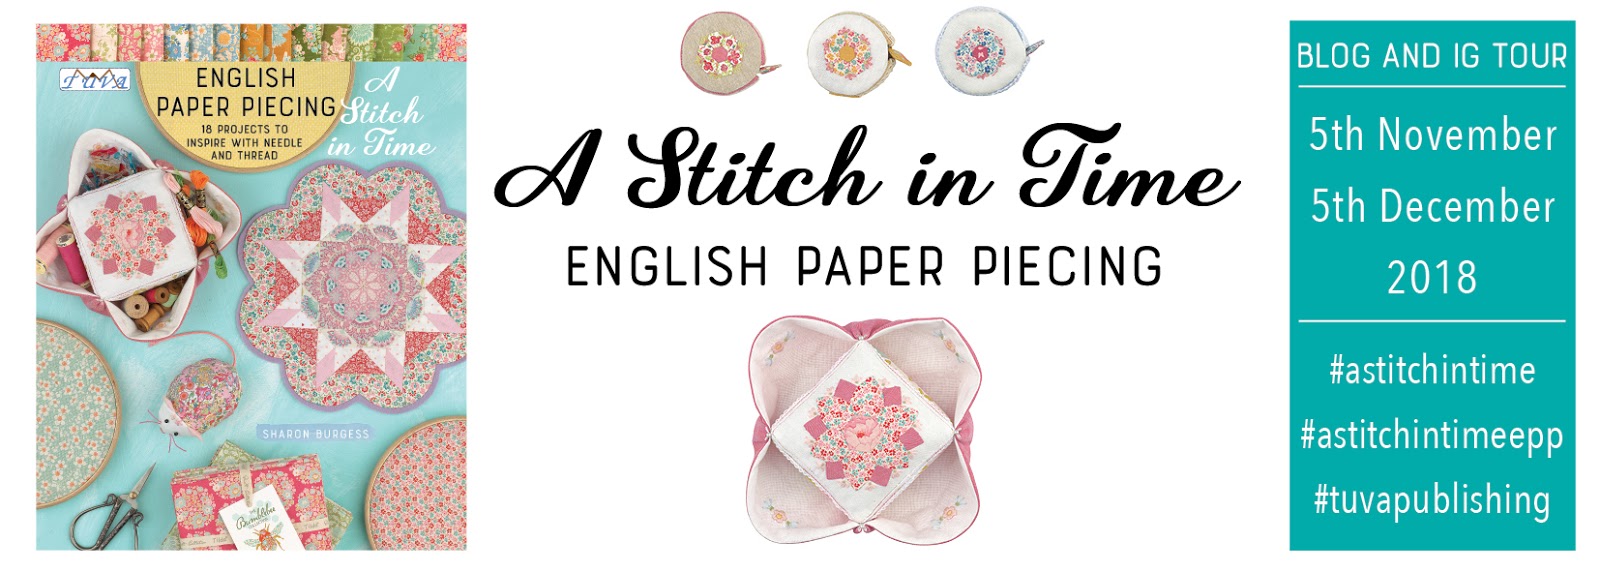 English Paper Piecing A Stitch In Time Book by Sharon Burgess- Quilt in a  Day Patterns